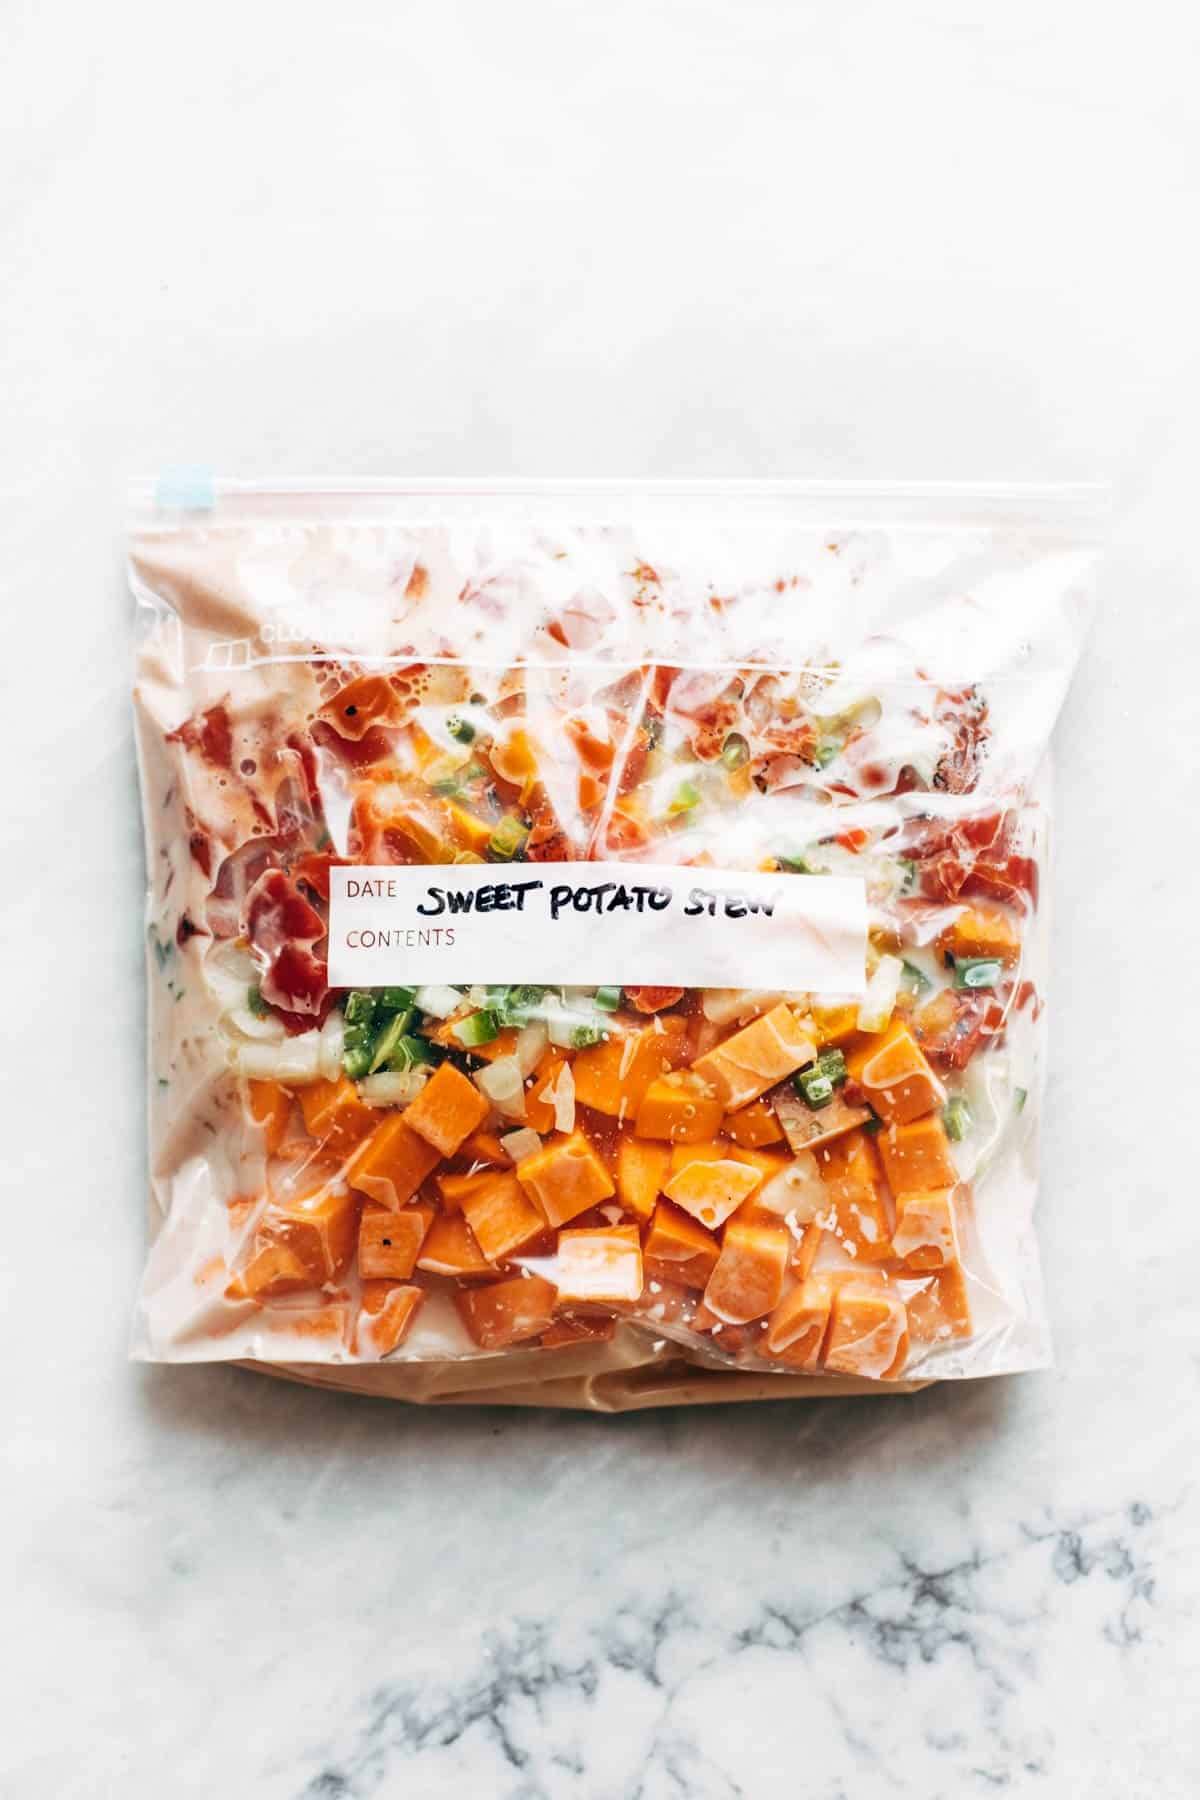 Spicy sweet potato peanut stew in a bag.